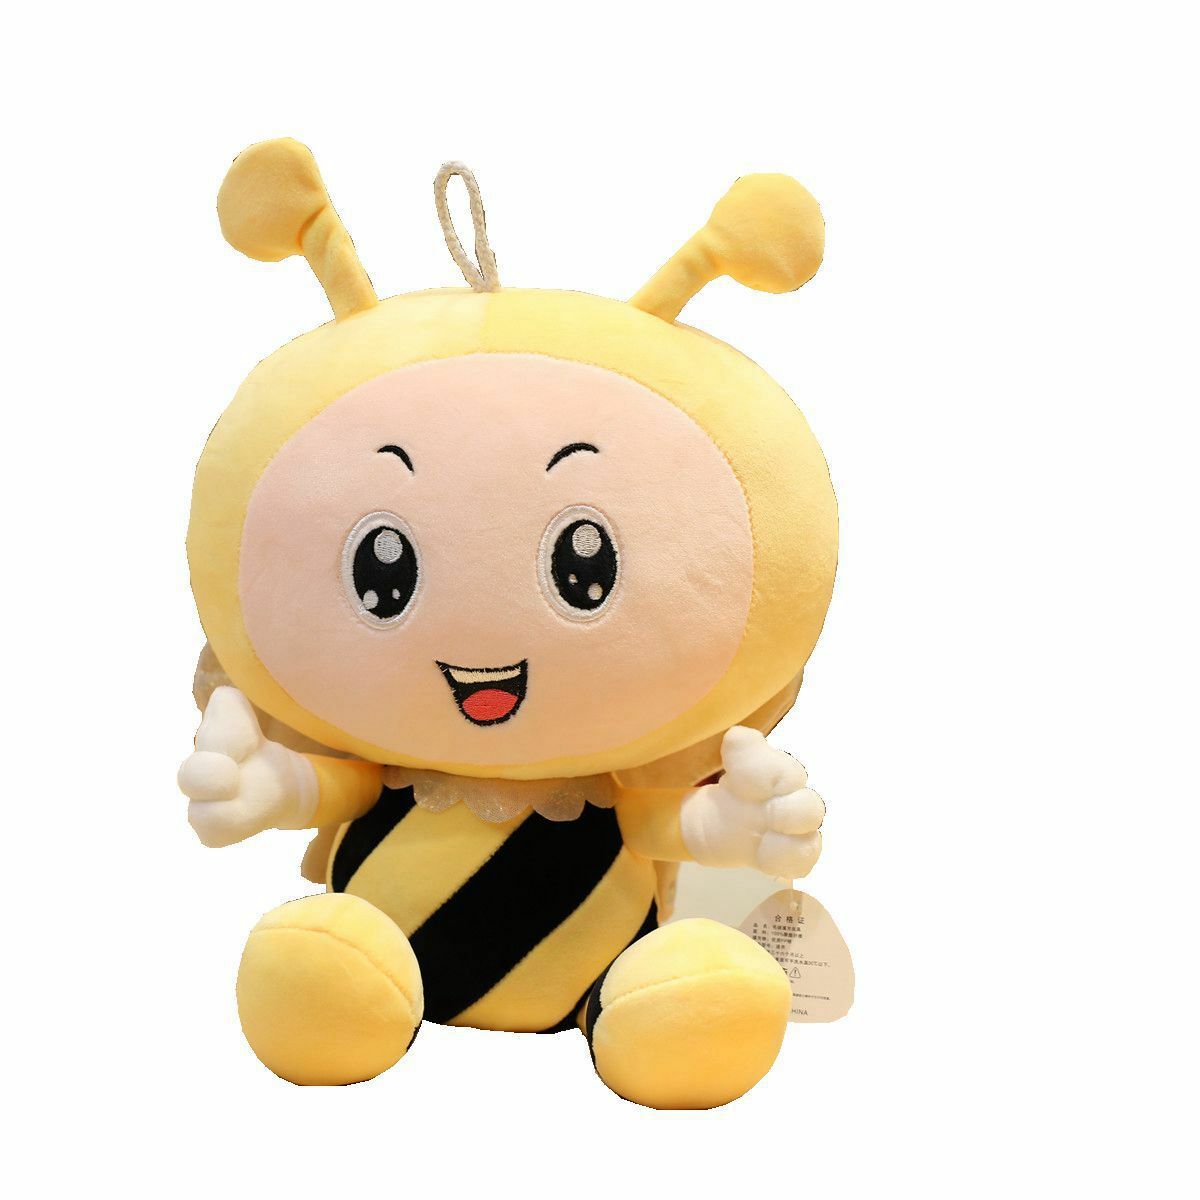 Bee Plushies Adorable Little Bee Plush Toy - Perfect Cuddly Companion for Kids